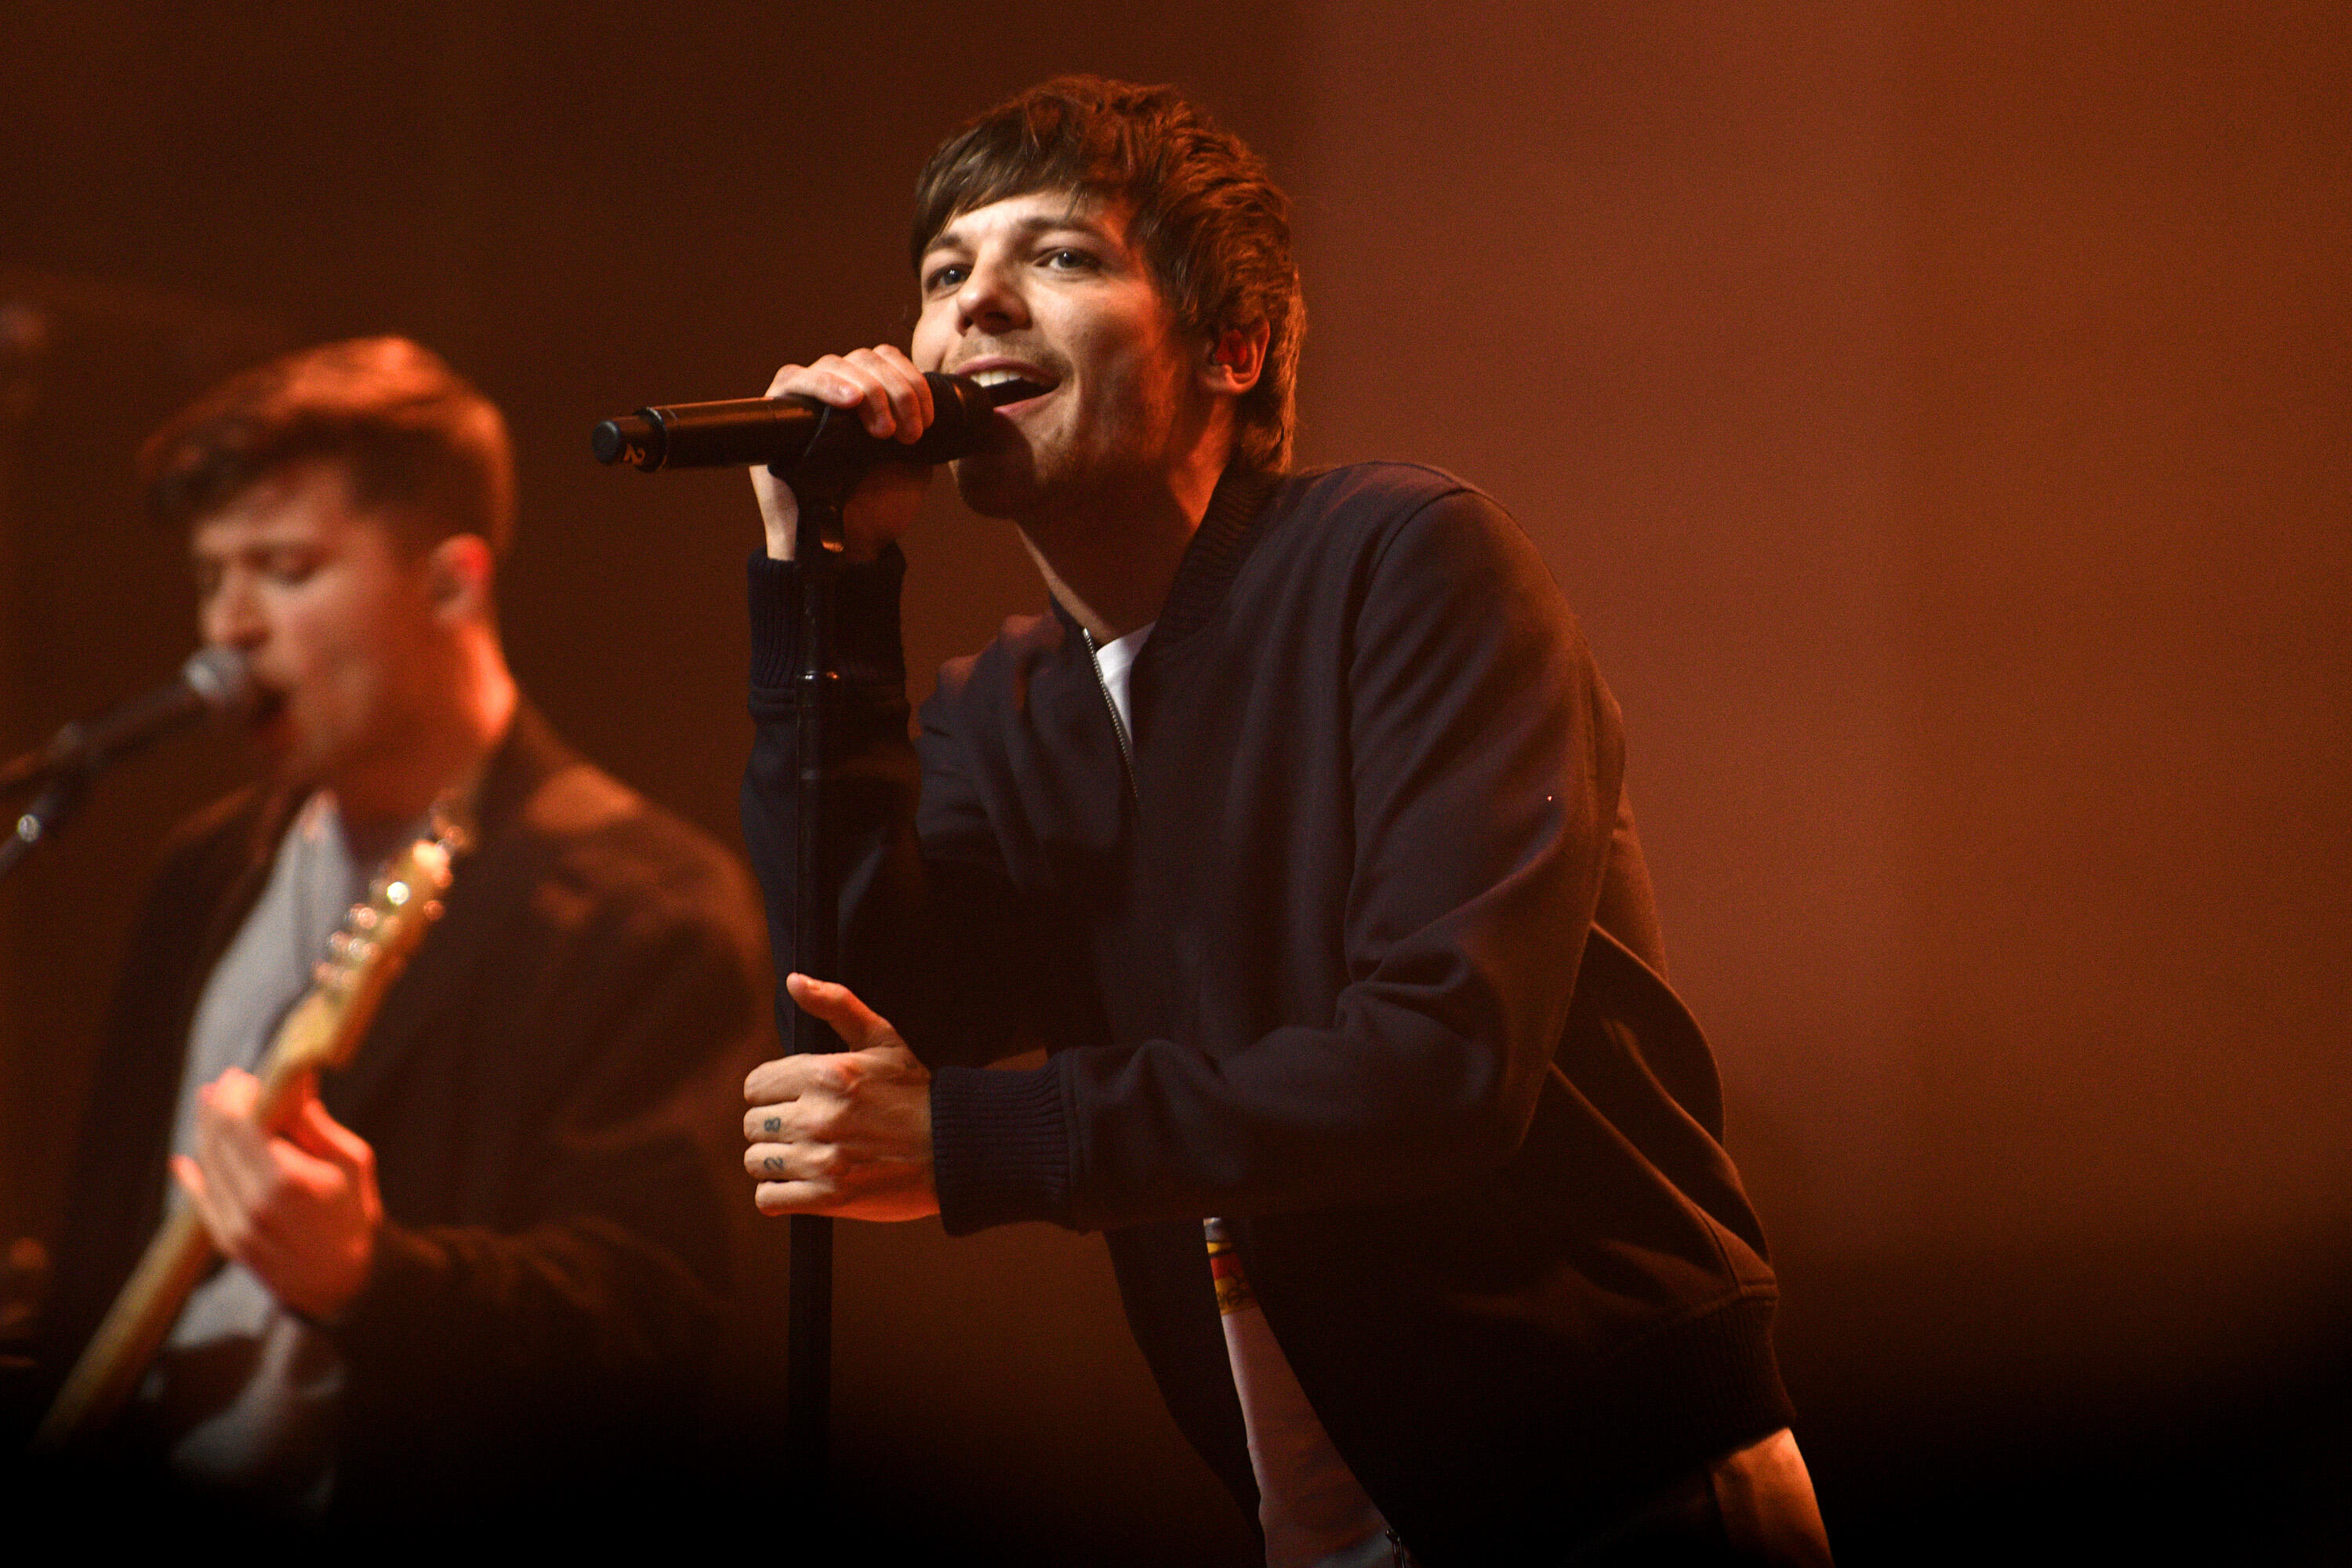 Louis Tomlinson delights fans with brand new single 'Two Of Us